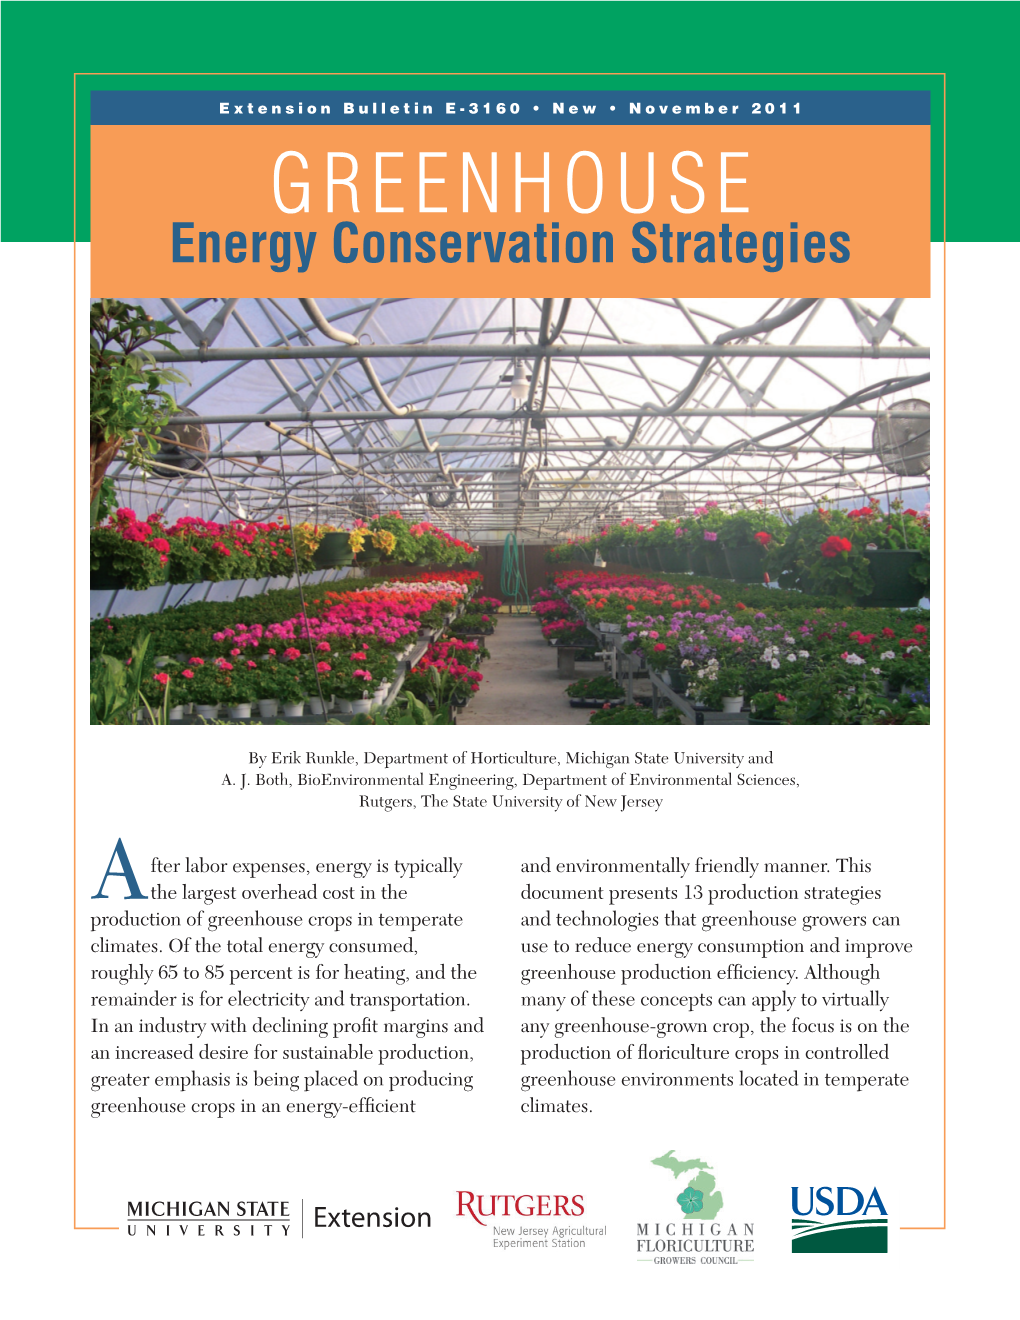 GREENHOUSE Energy Conservation Strategies